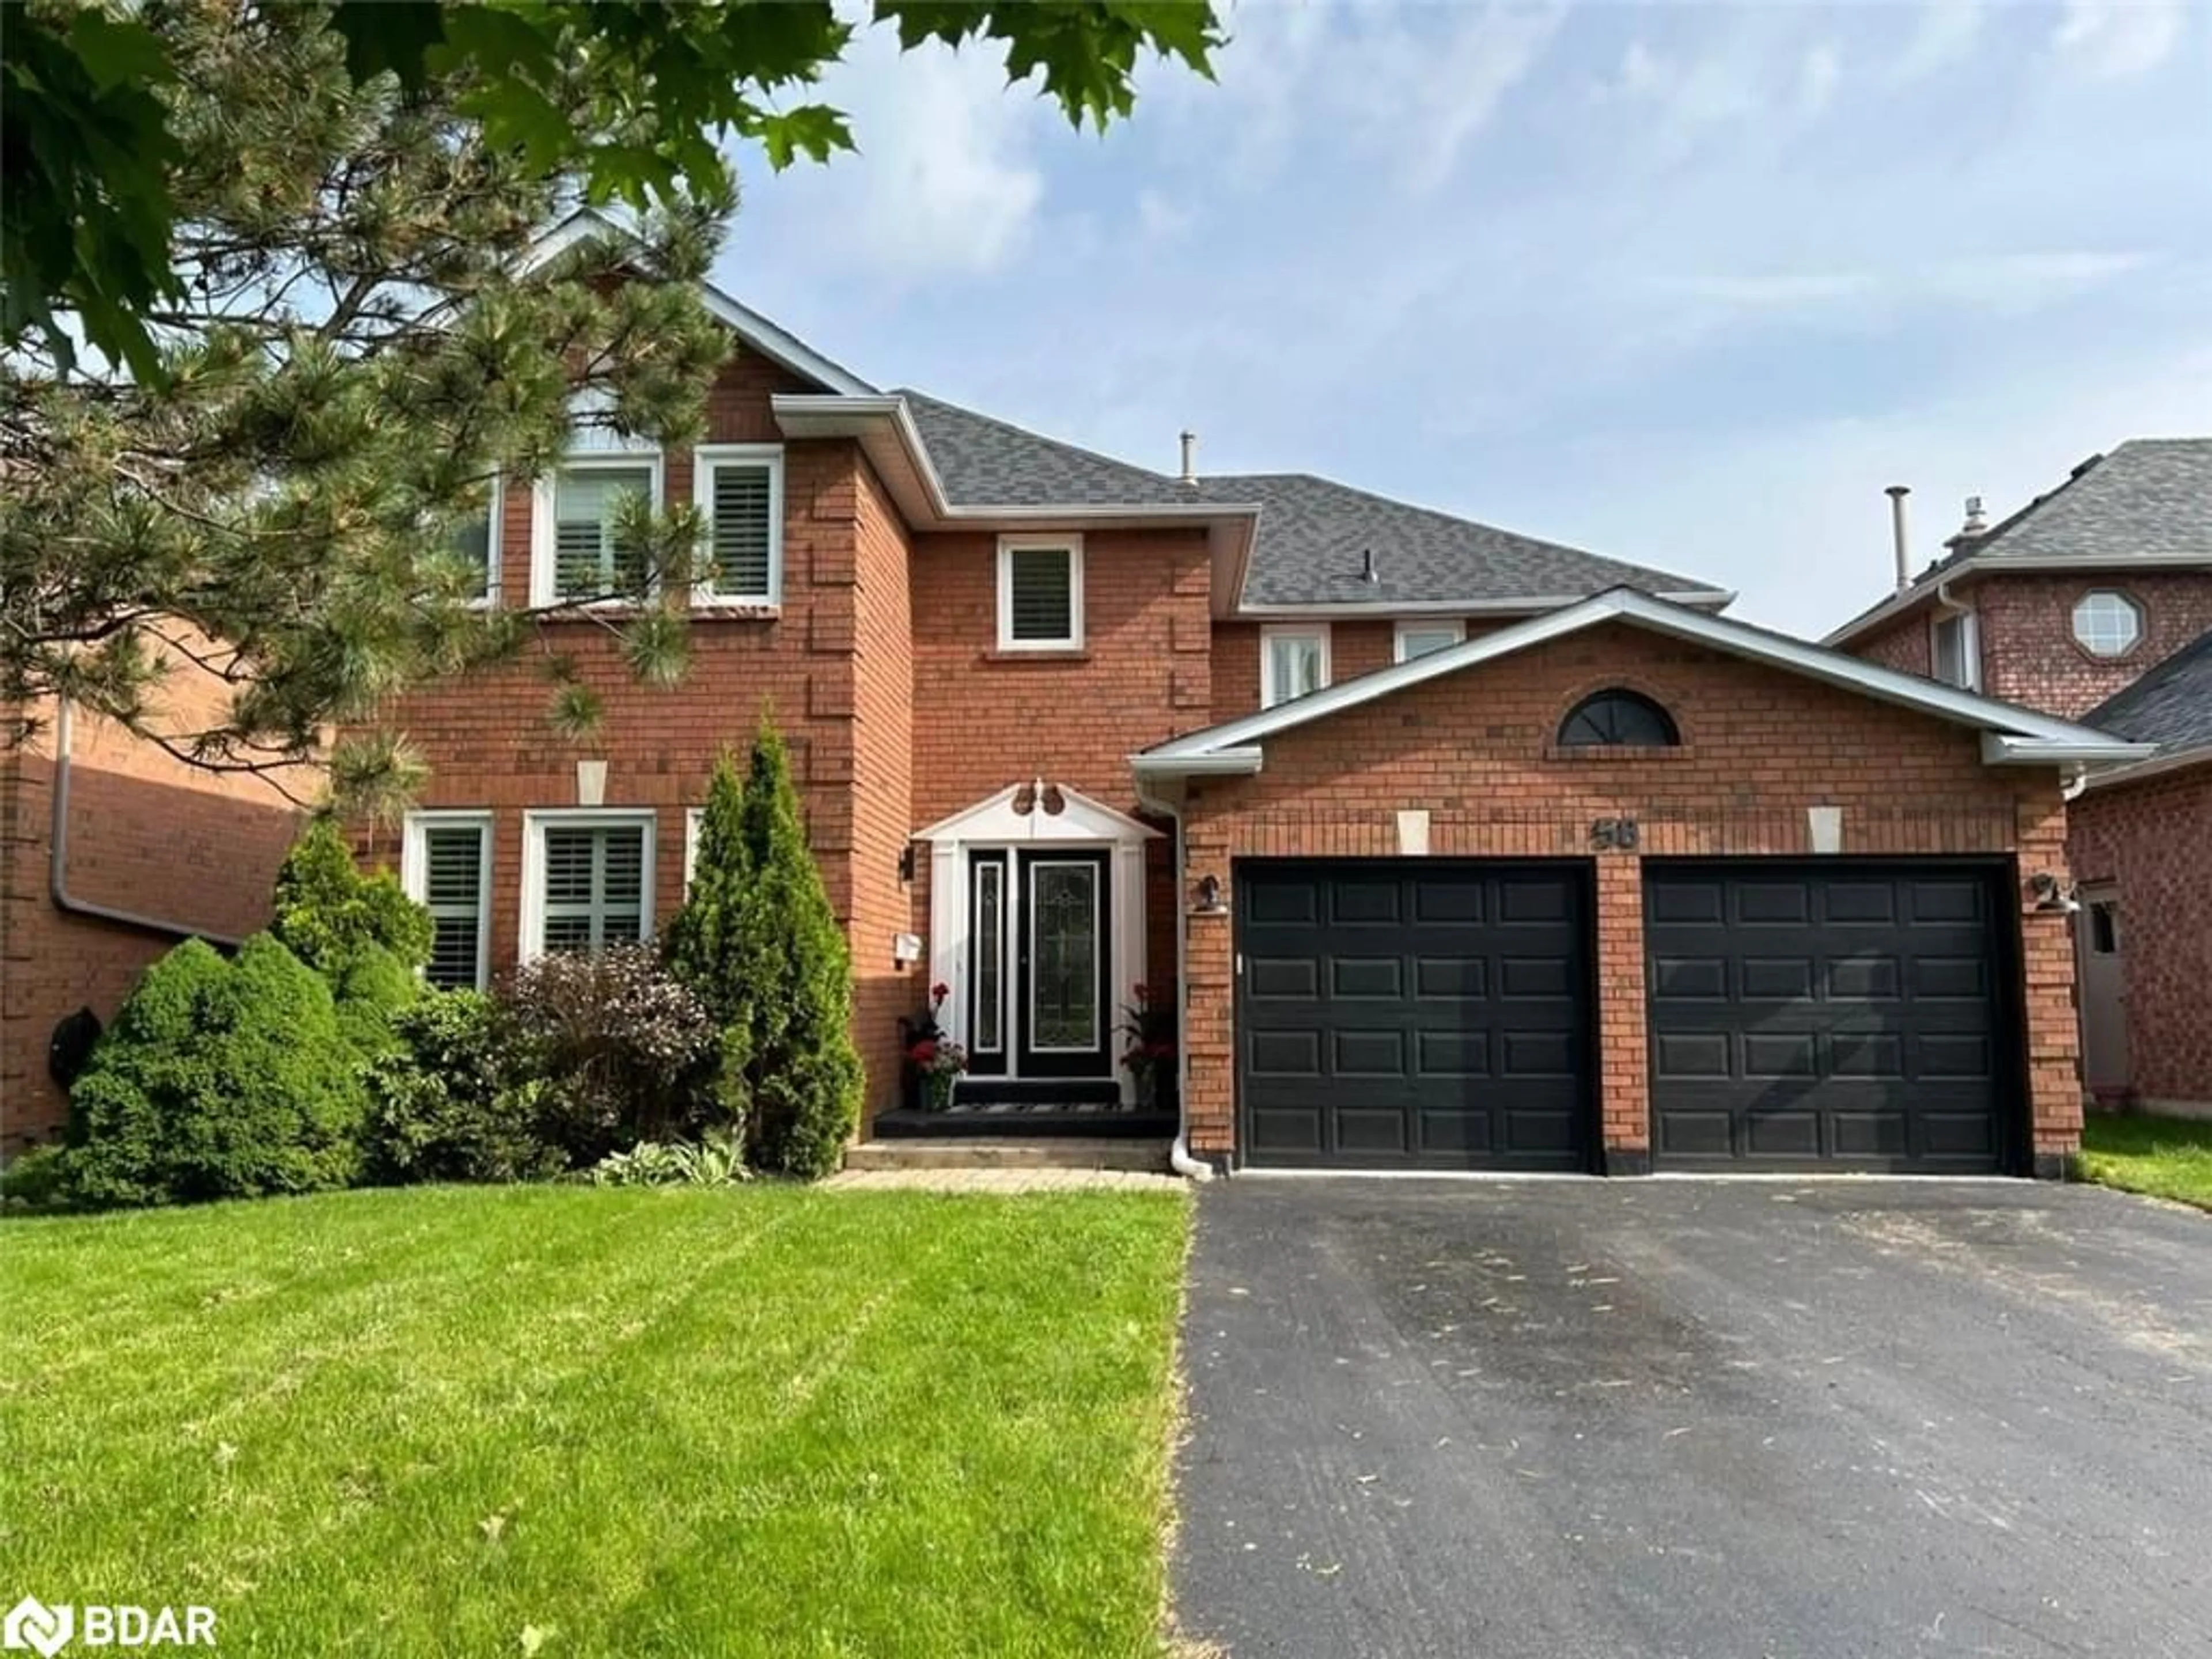 Home with brick exterior material for 58 Brushwood Cres, Barrie Ontario L4N 7G6